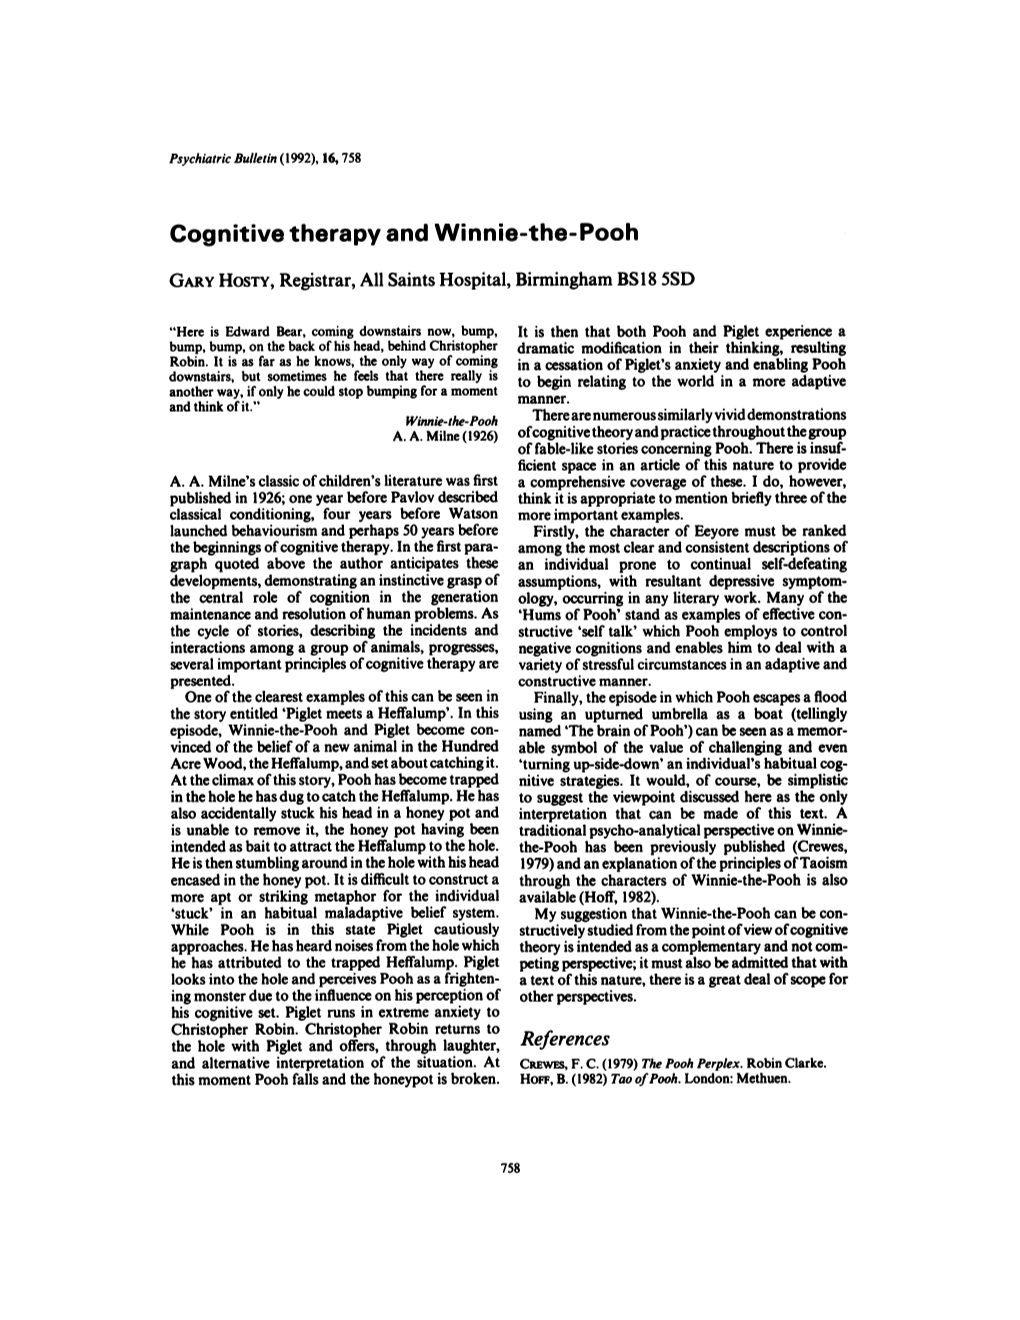 Cognitive Therapy and Winnie-The-Pooh